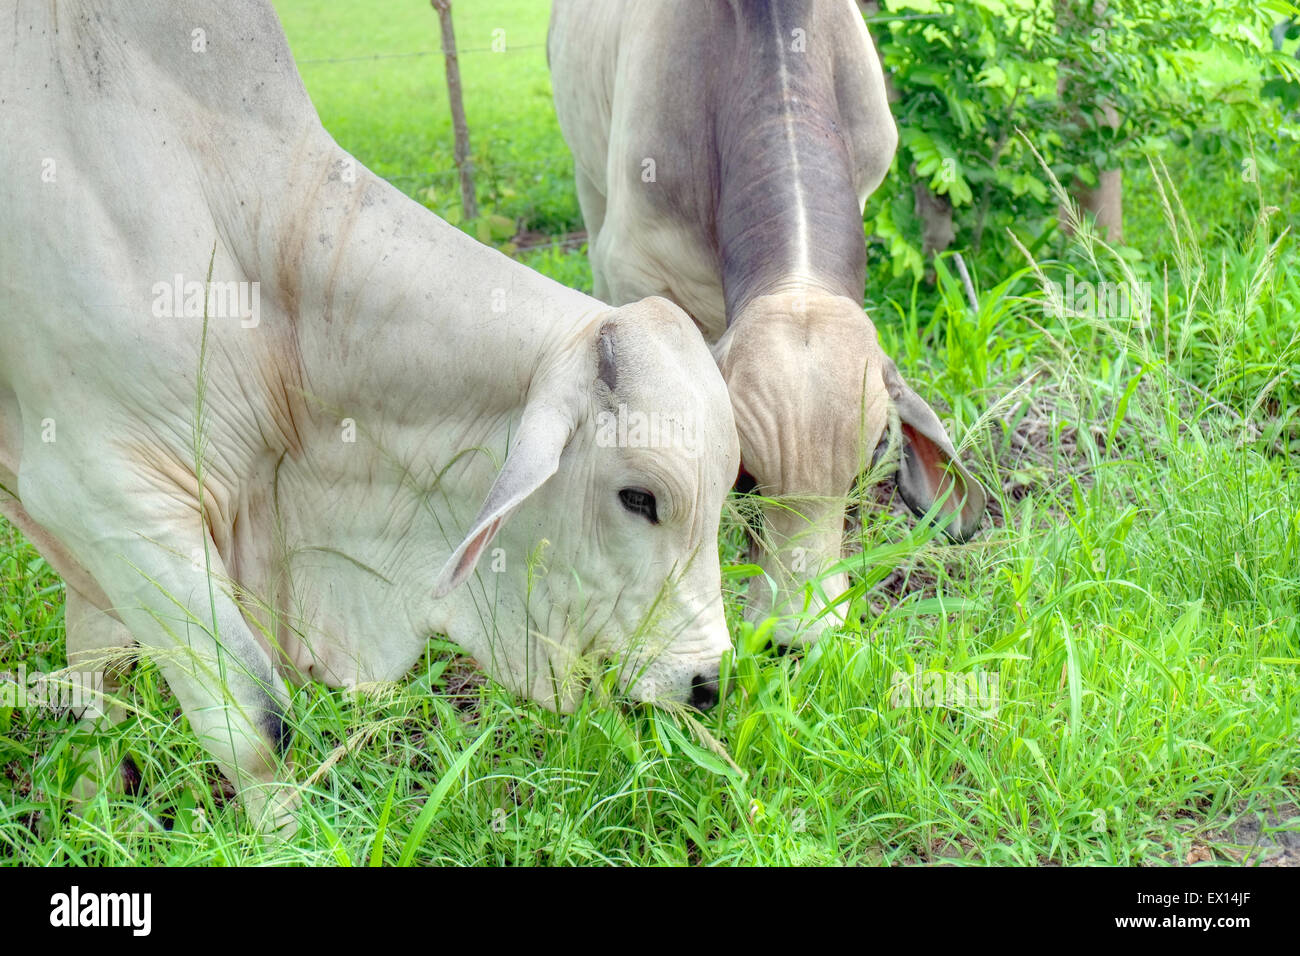 Tow Brahman bulls eating grass at the side of a country road Stock Photo